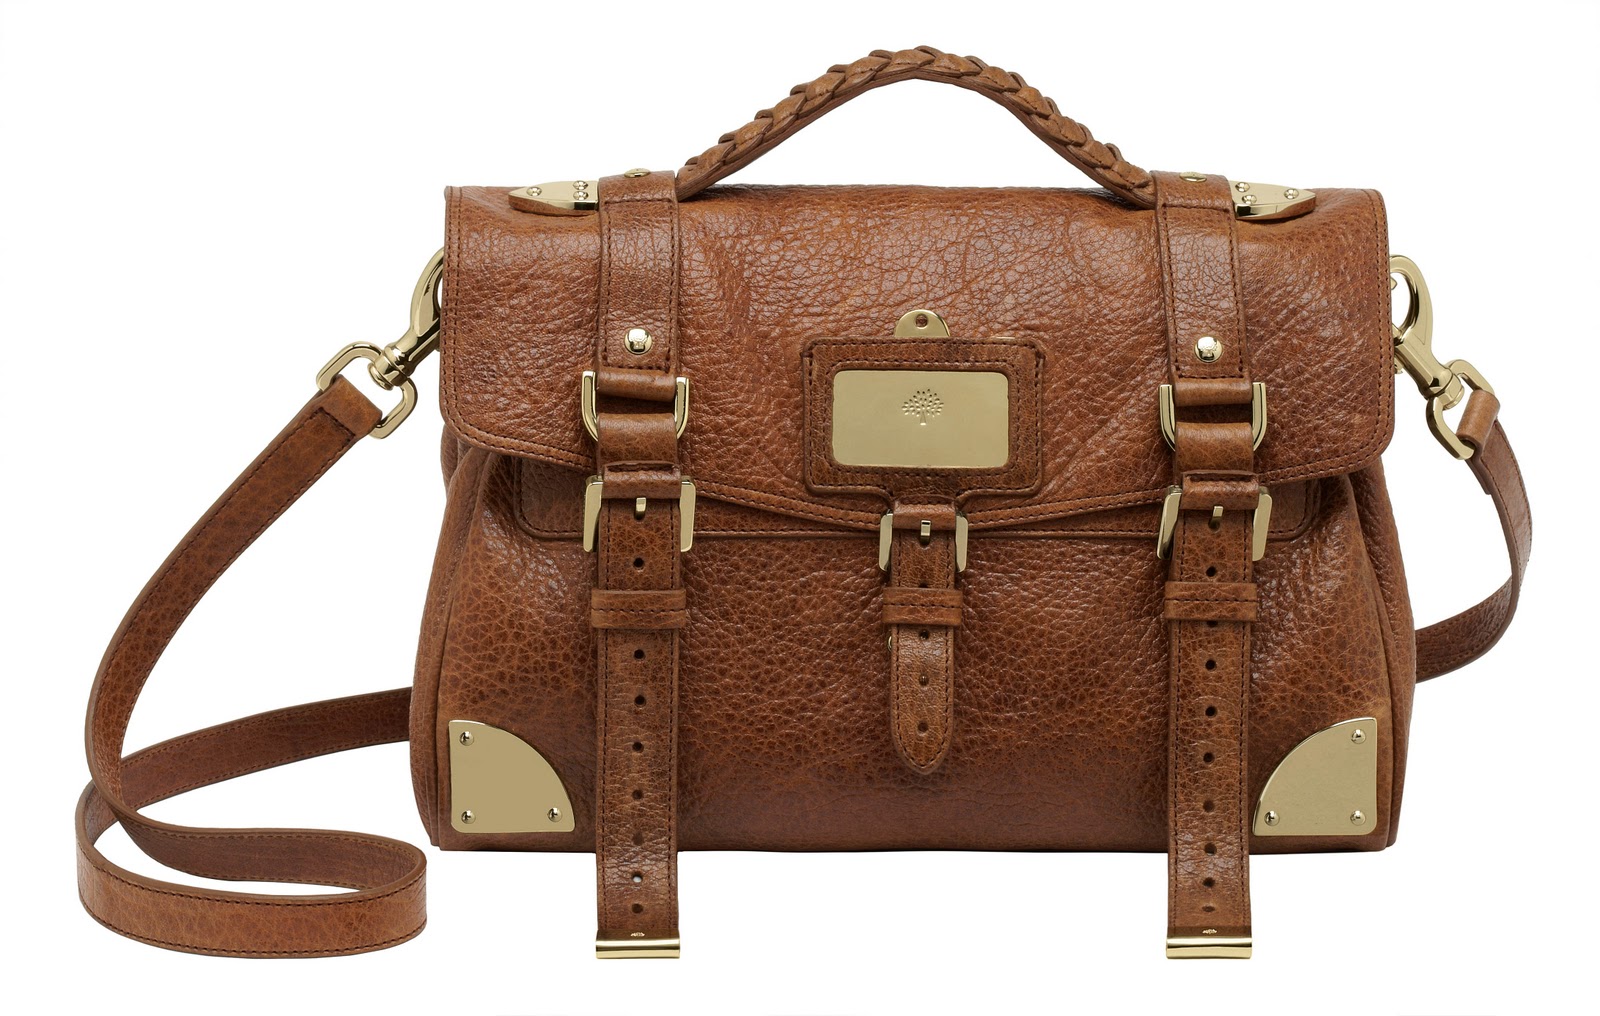 Introducing Mulberry Travel Bag...